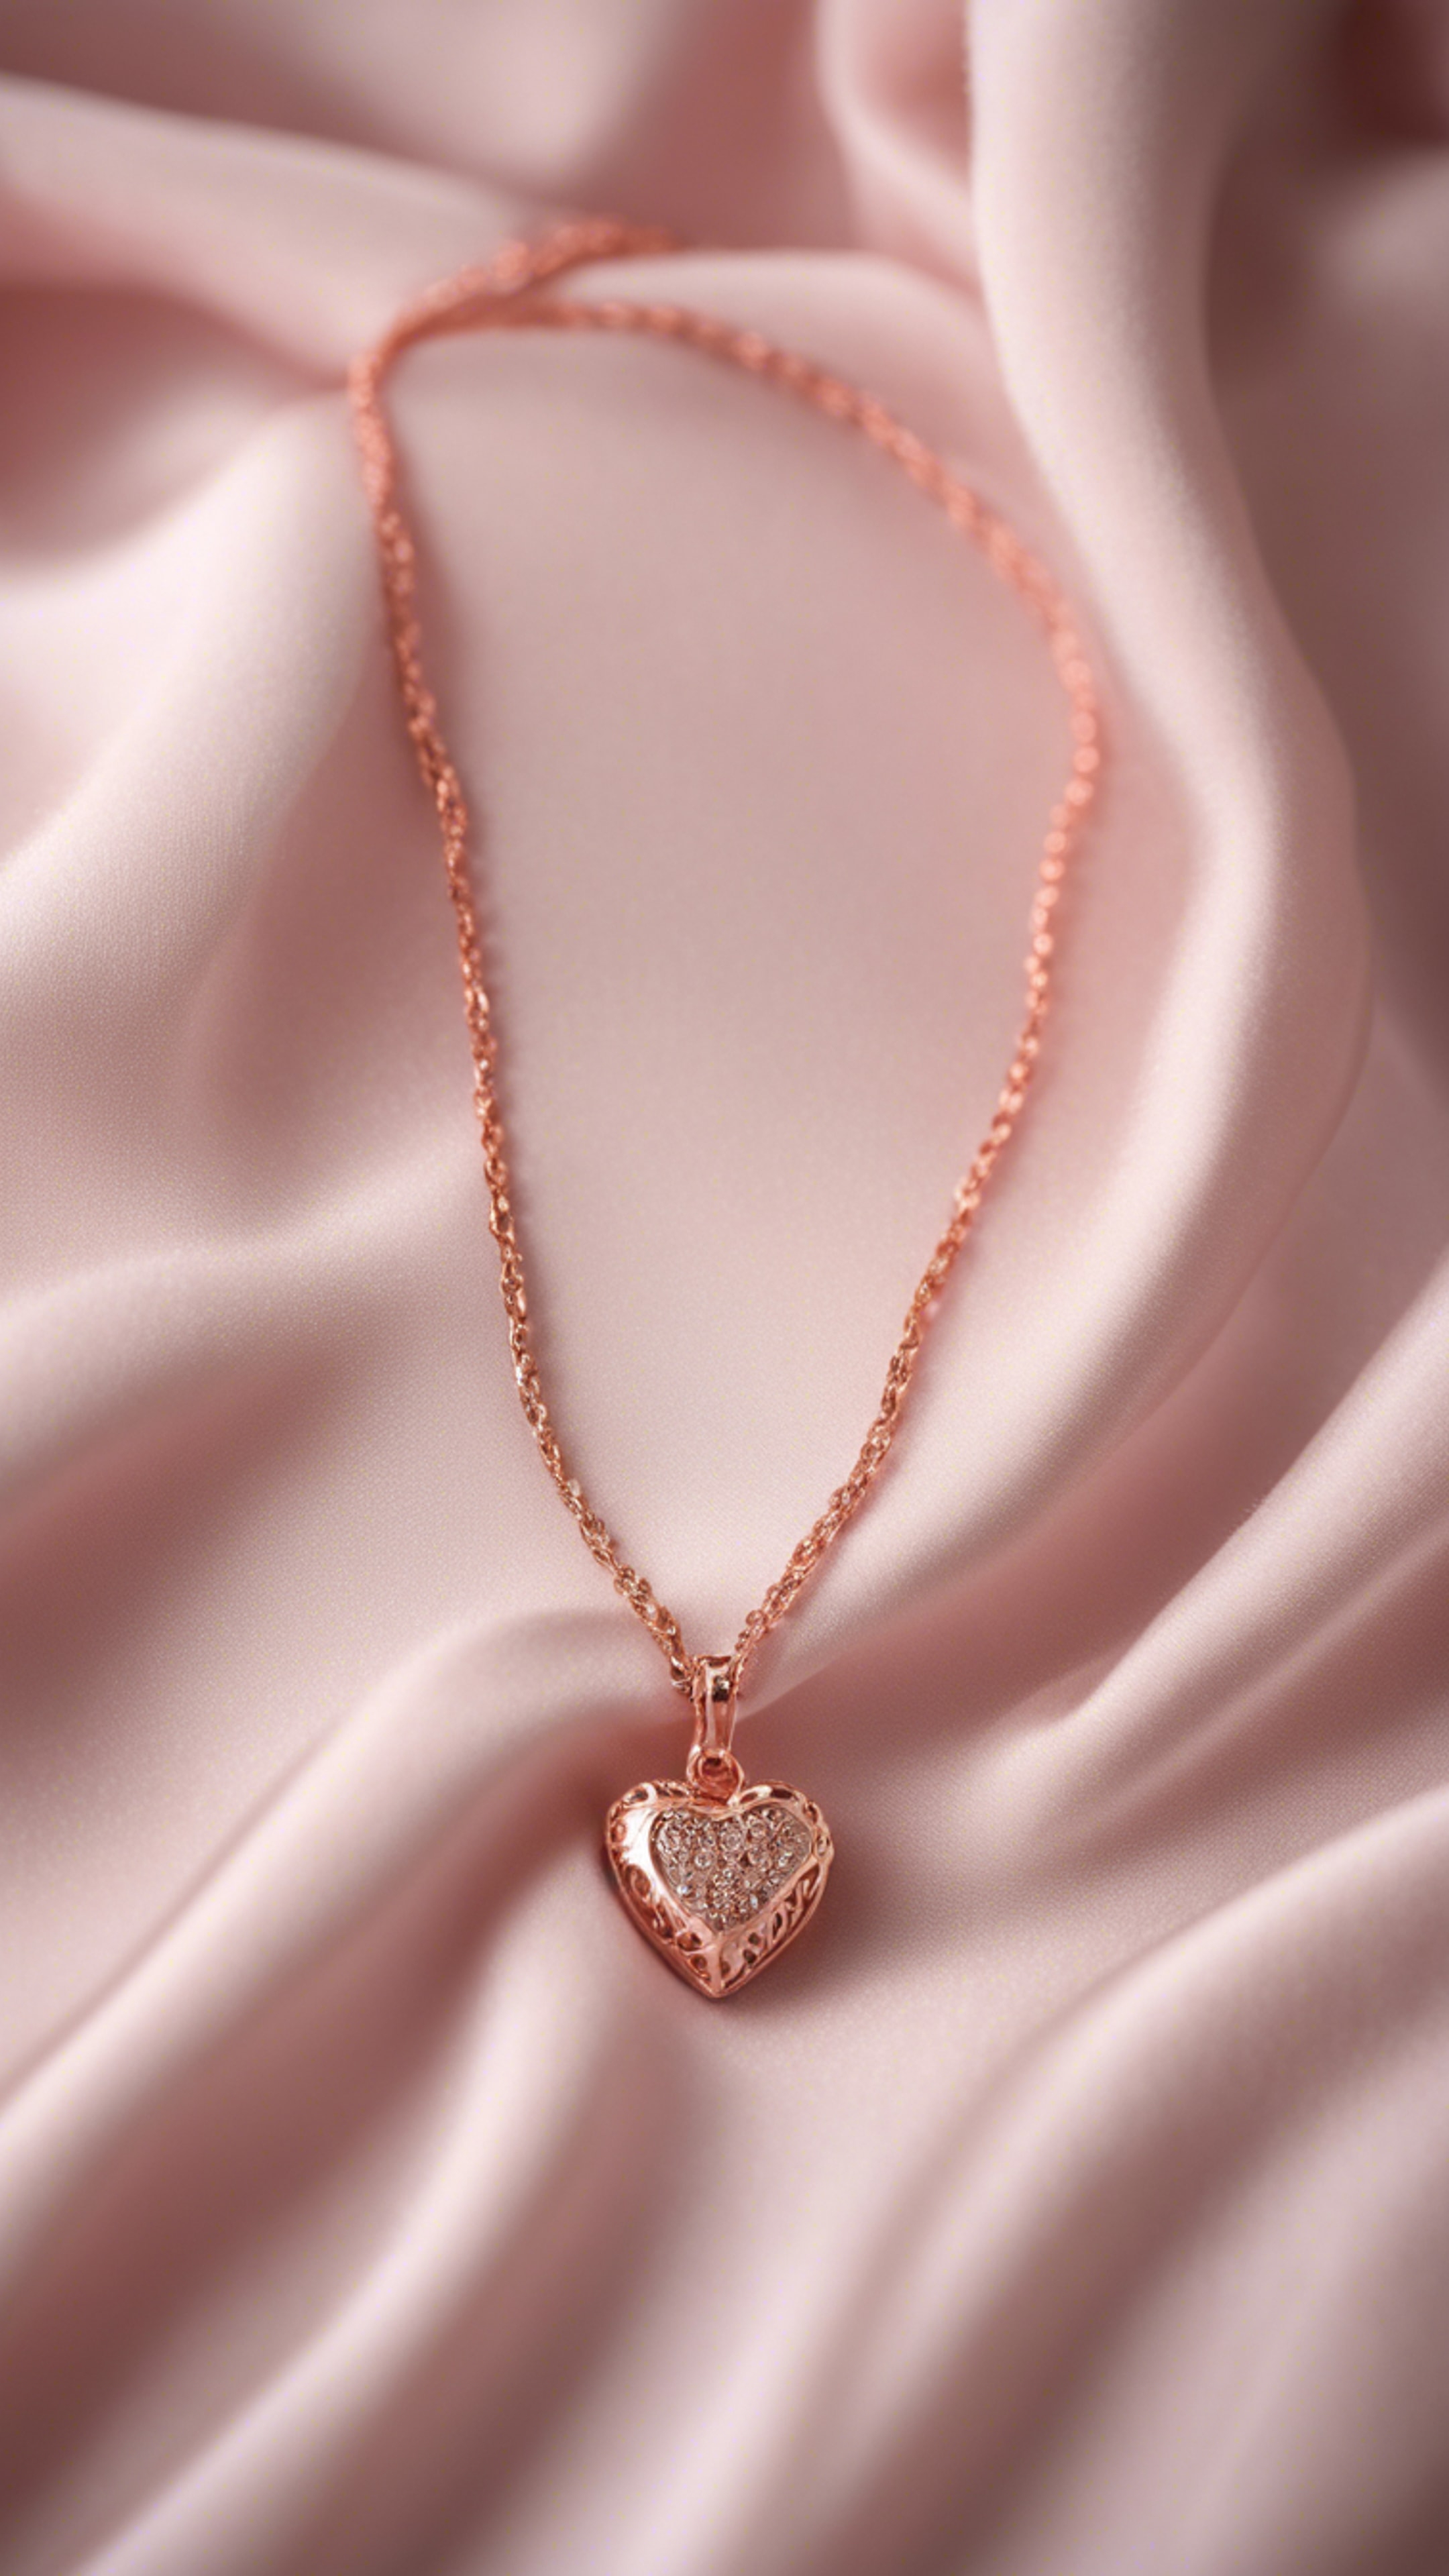 A delicate rose gold chain necklace with a small heart pendant, displayed on a soft pink satin fabric. Ფონი[1bffd5f9a0f0499fae91]